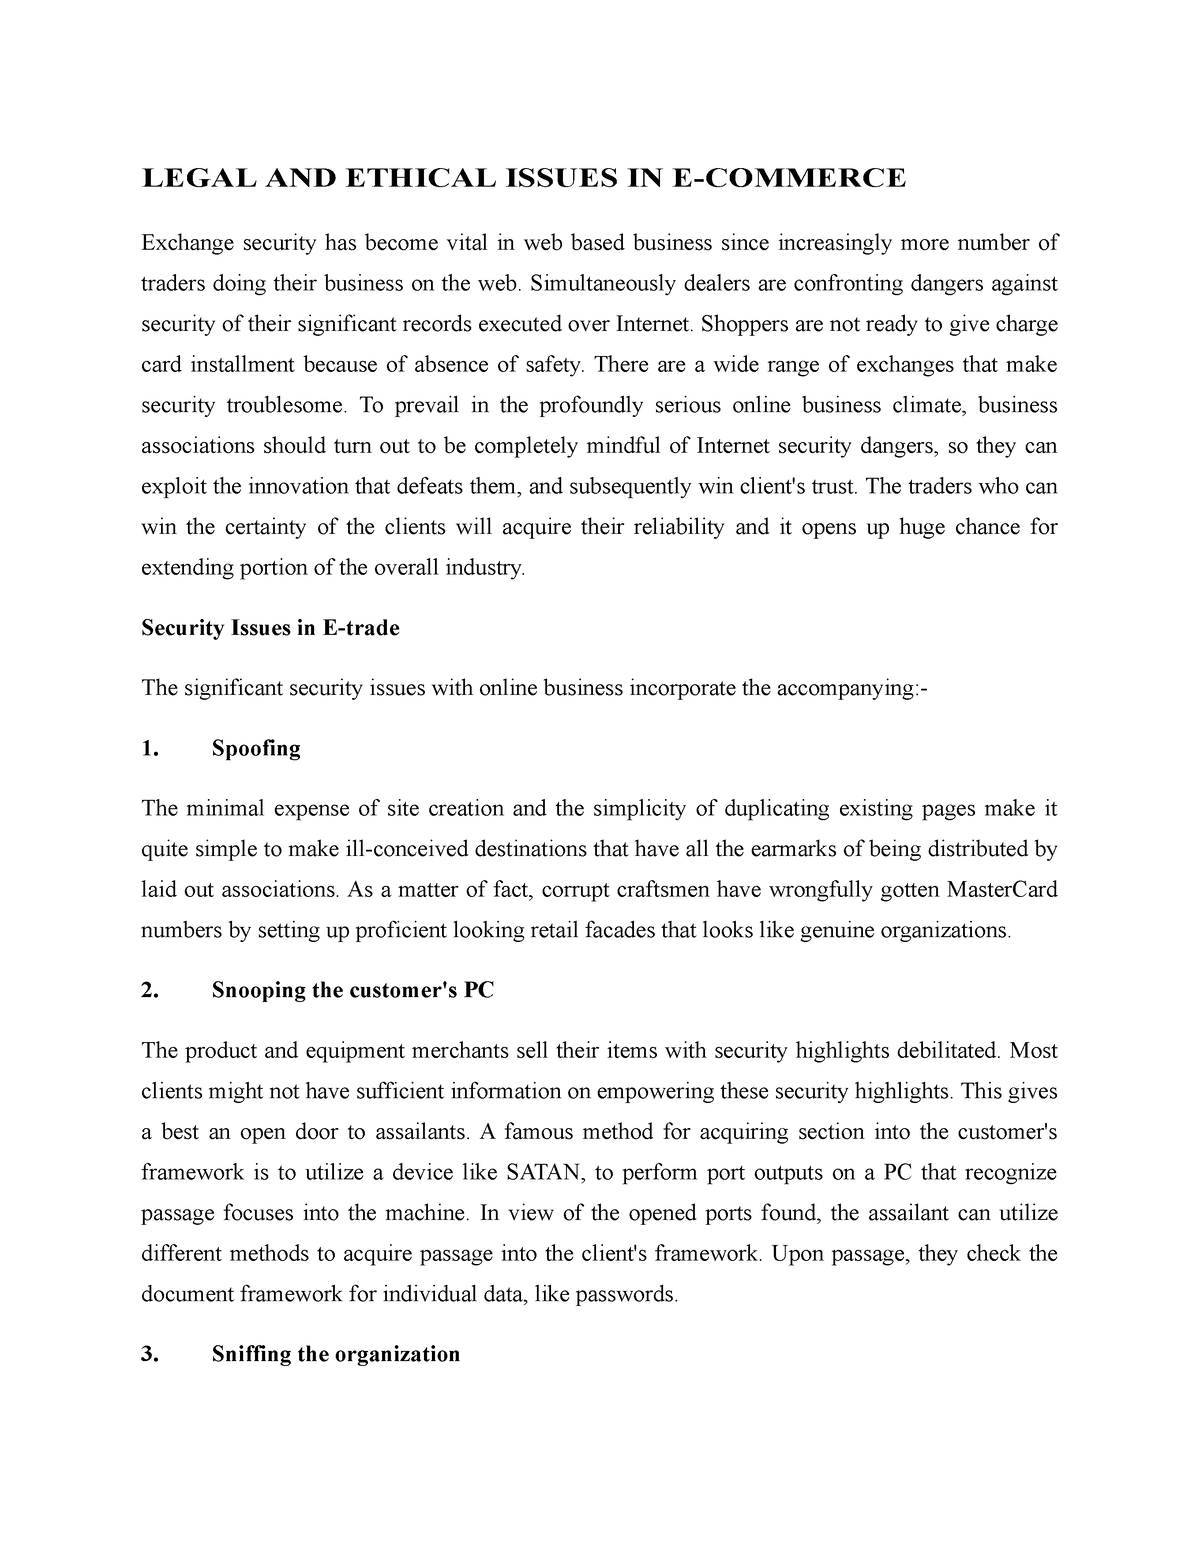 essay on ethical problems of e commerce